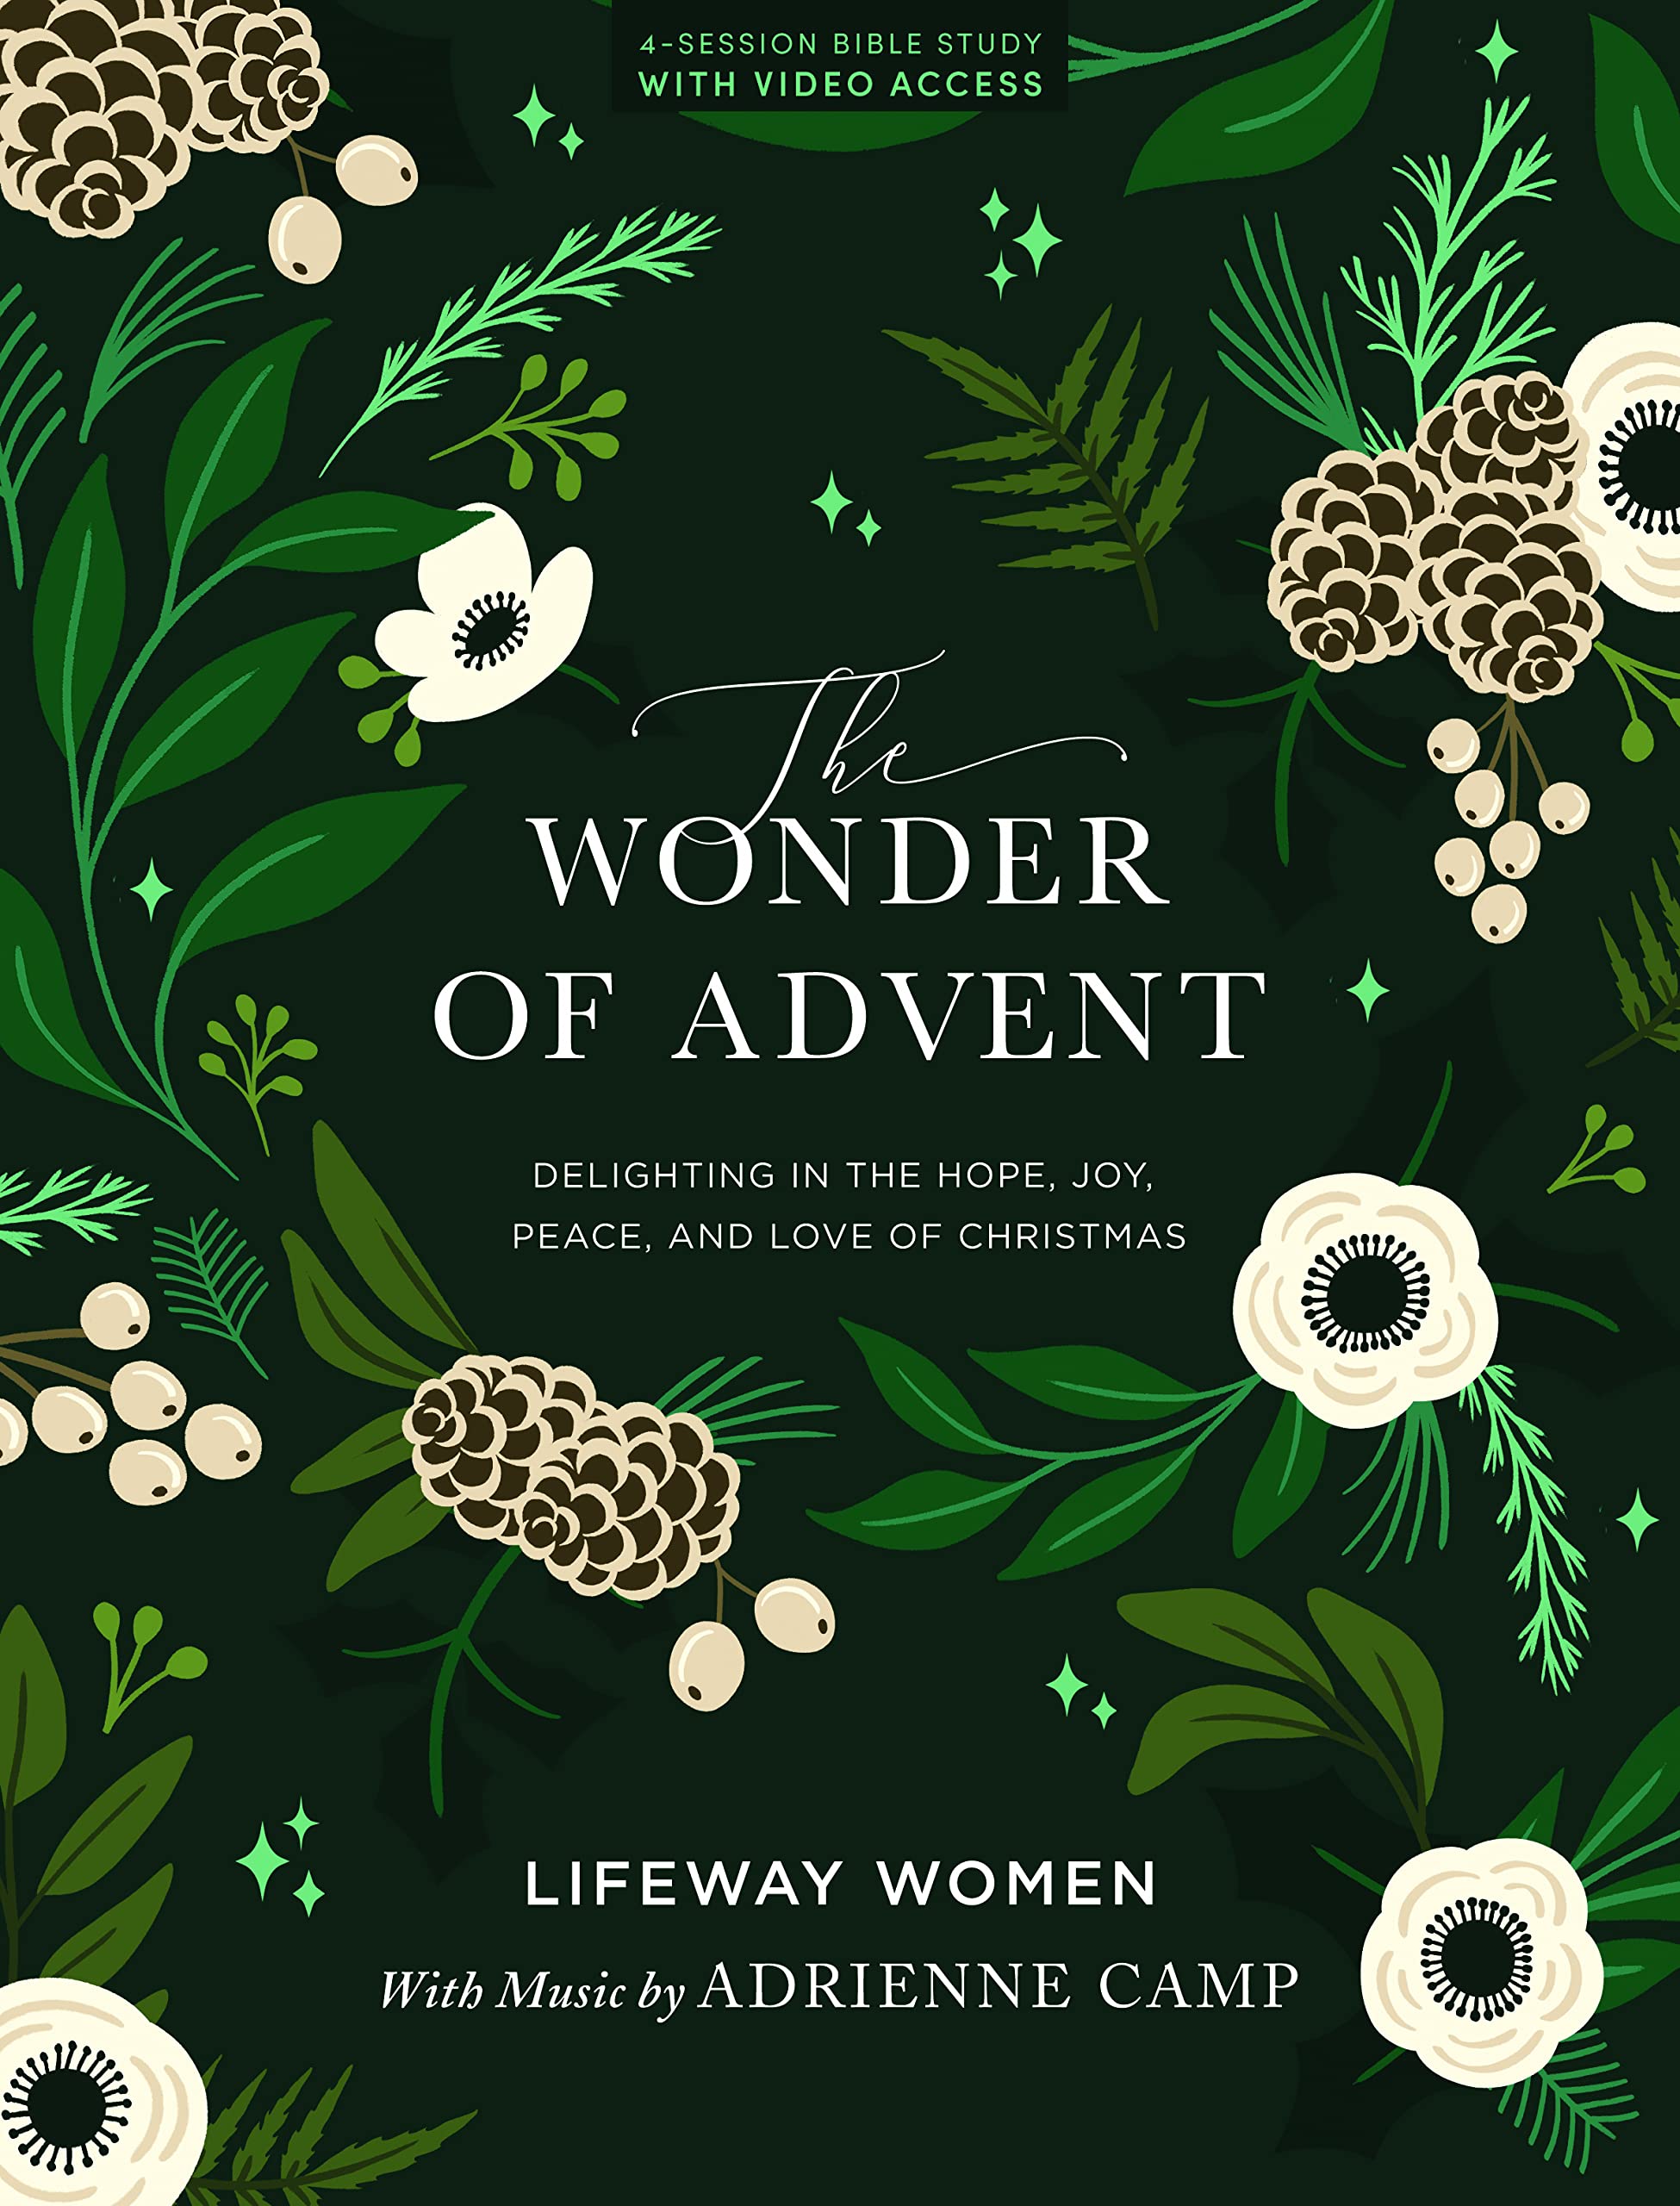 The Wonder of Advent - Bible Study Book with Video Access: Delighting in the Hope, Joy, Peace, and Love of Christmas